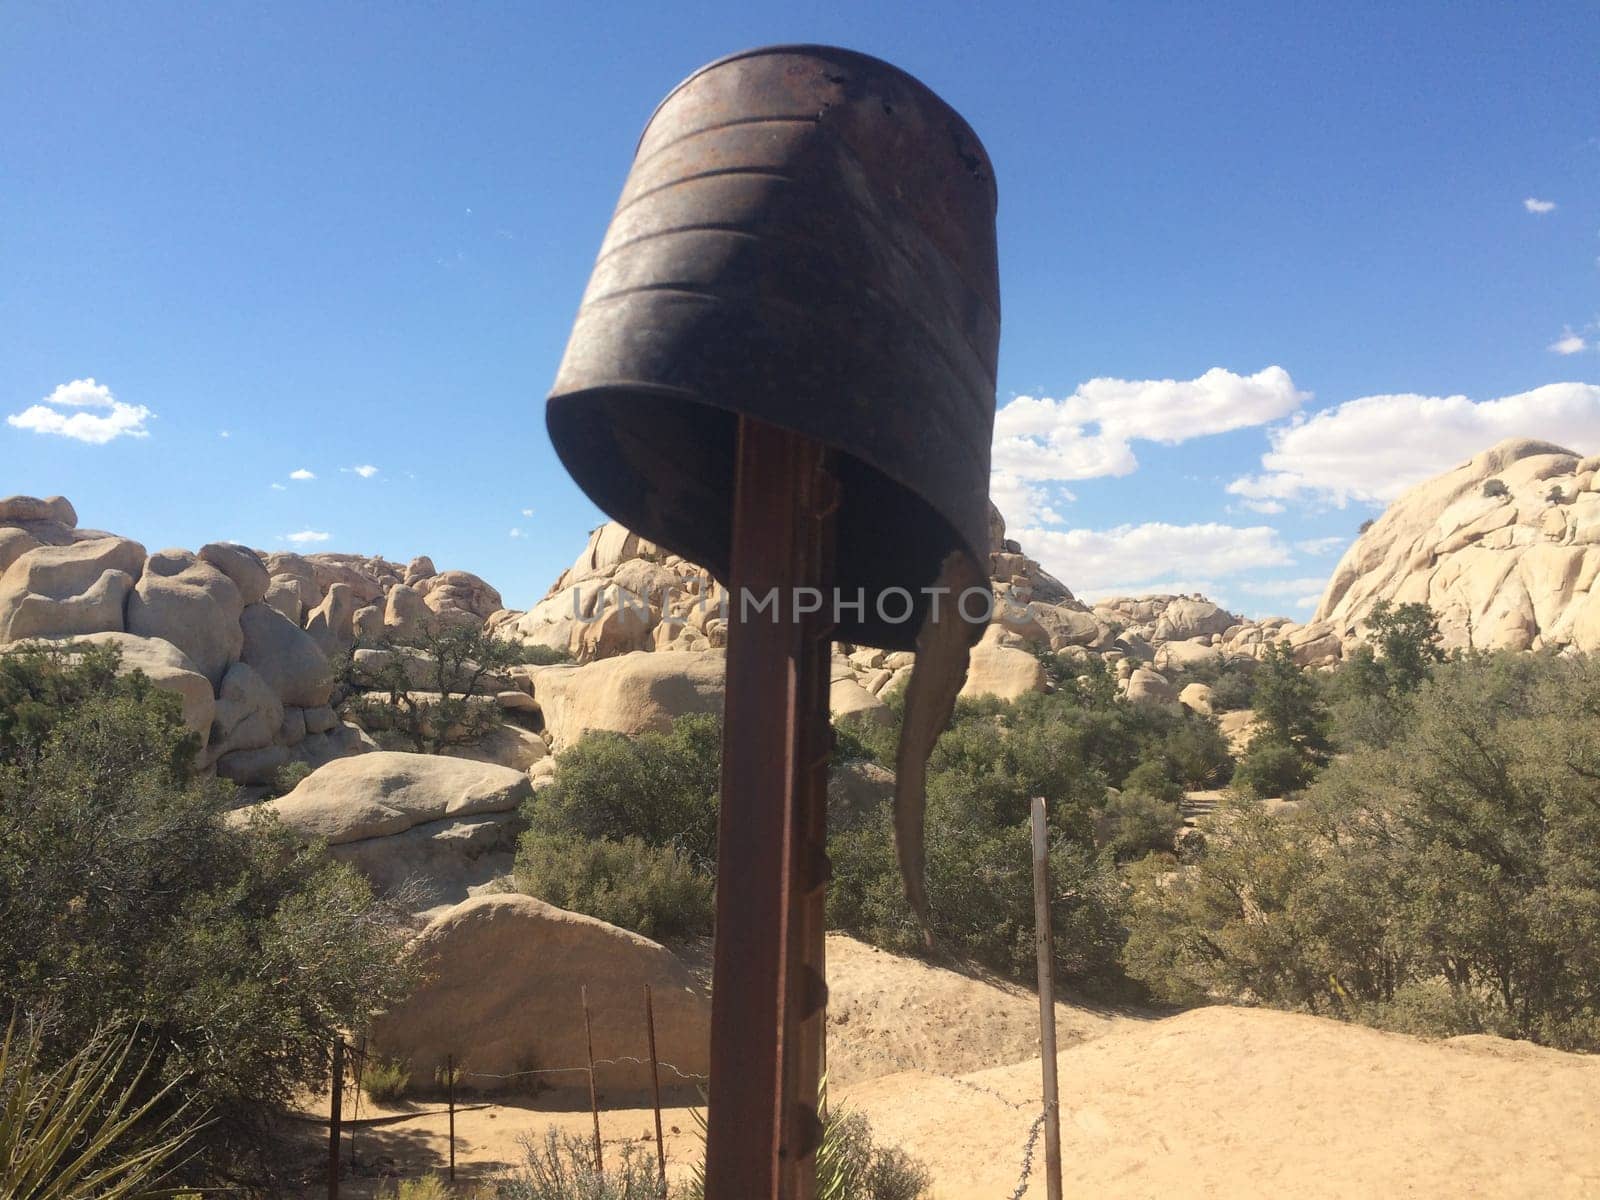 Rusty Old Can Upside Down on Post in Scenic Desert . High quality photo